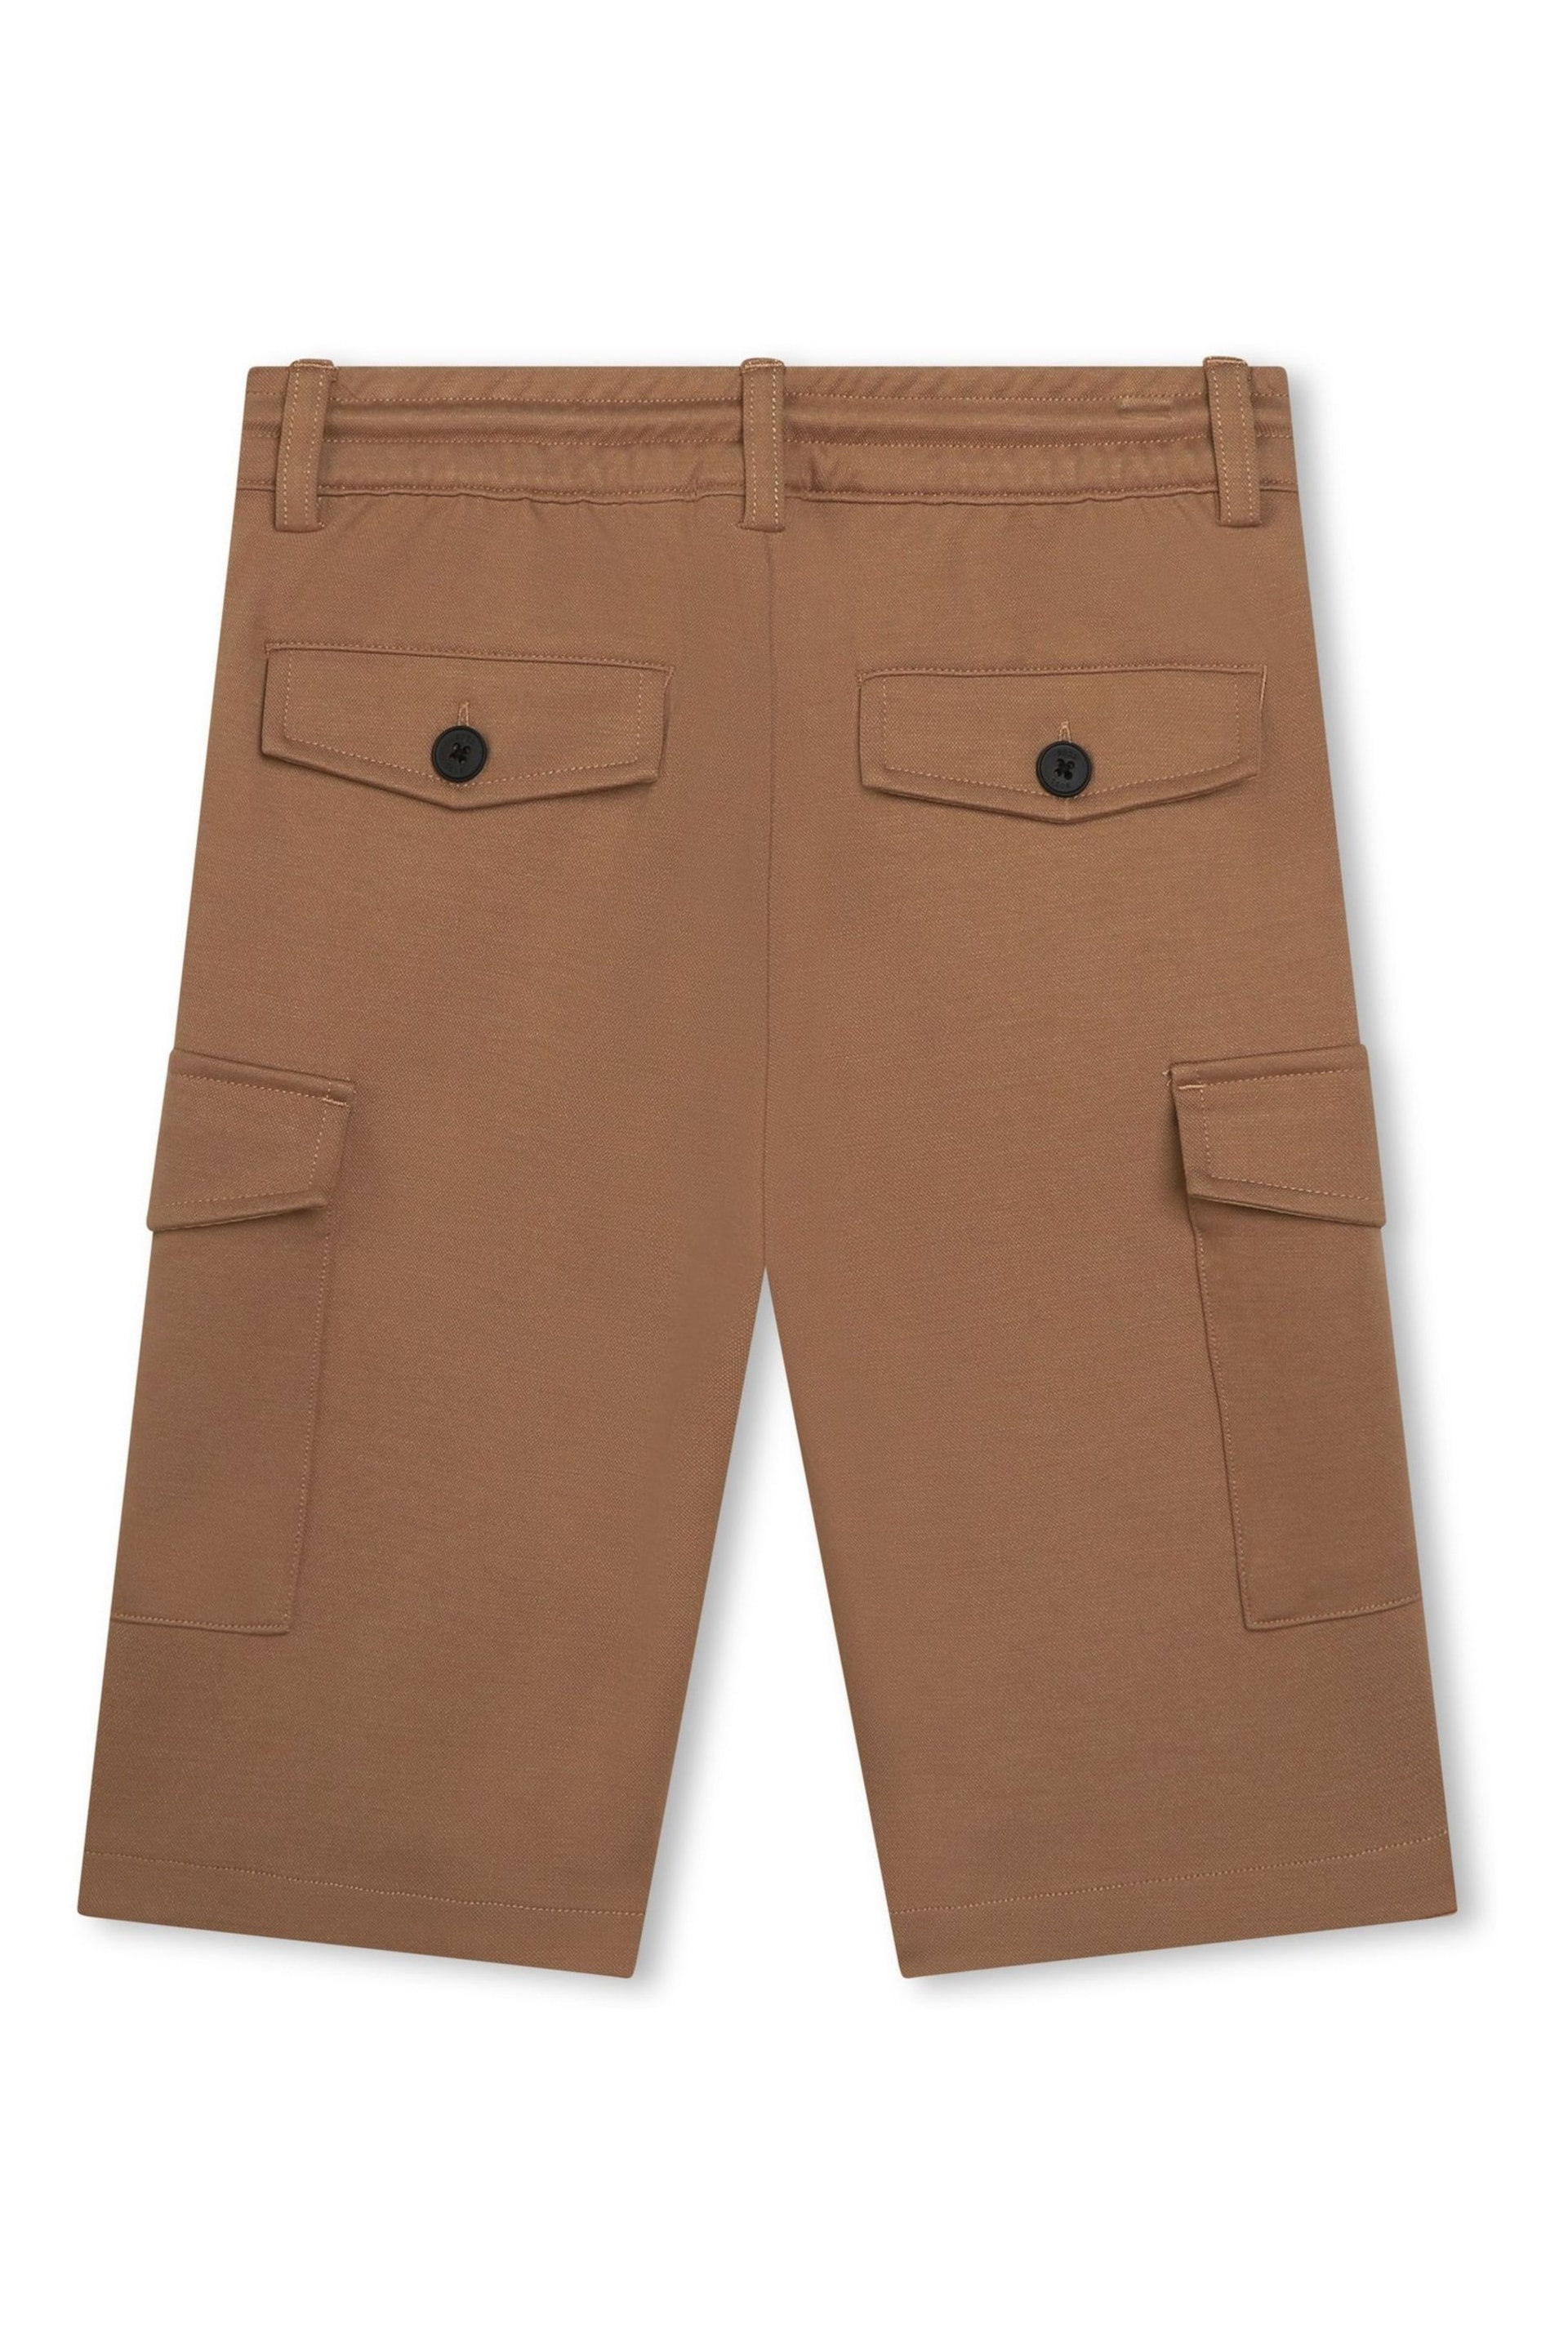 BOSS Brown Utility Cargo Pocket Shorts - Image 5 of 6